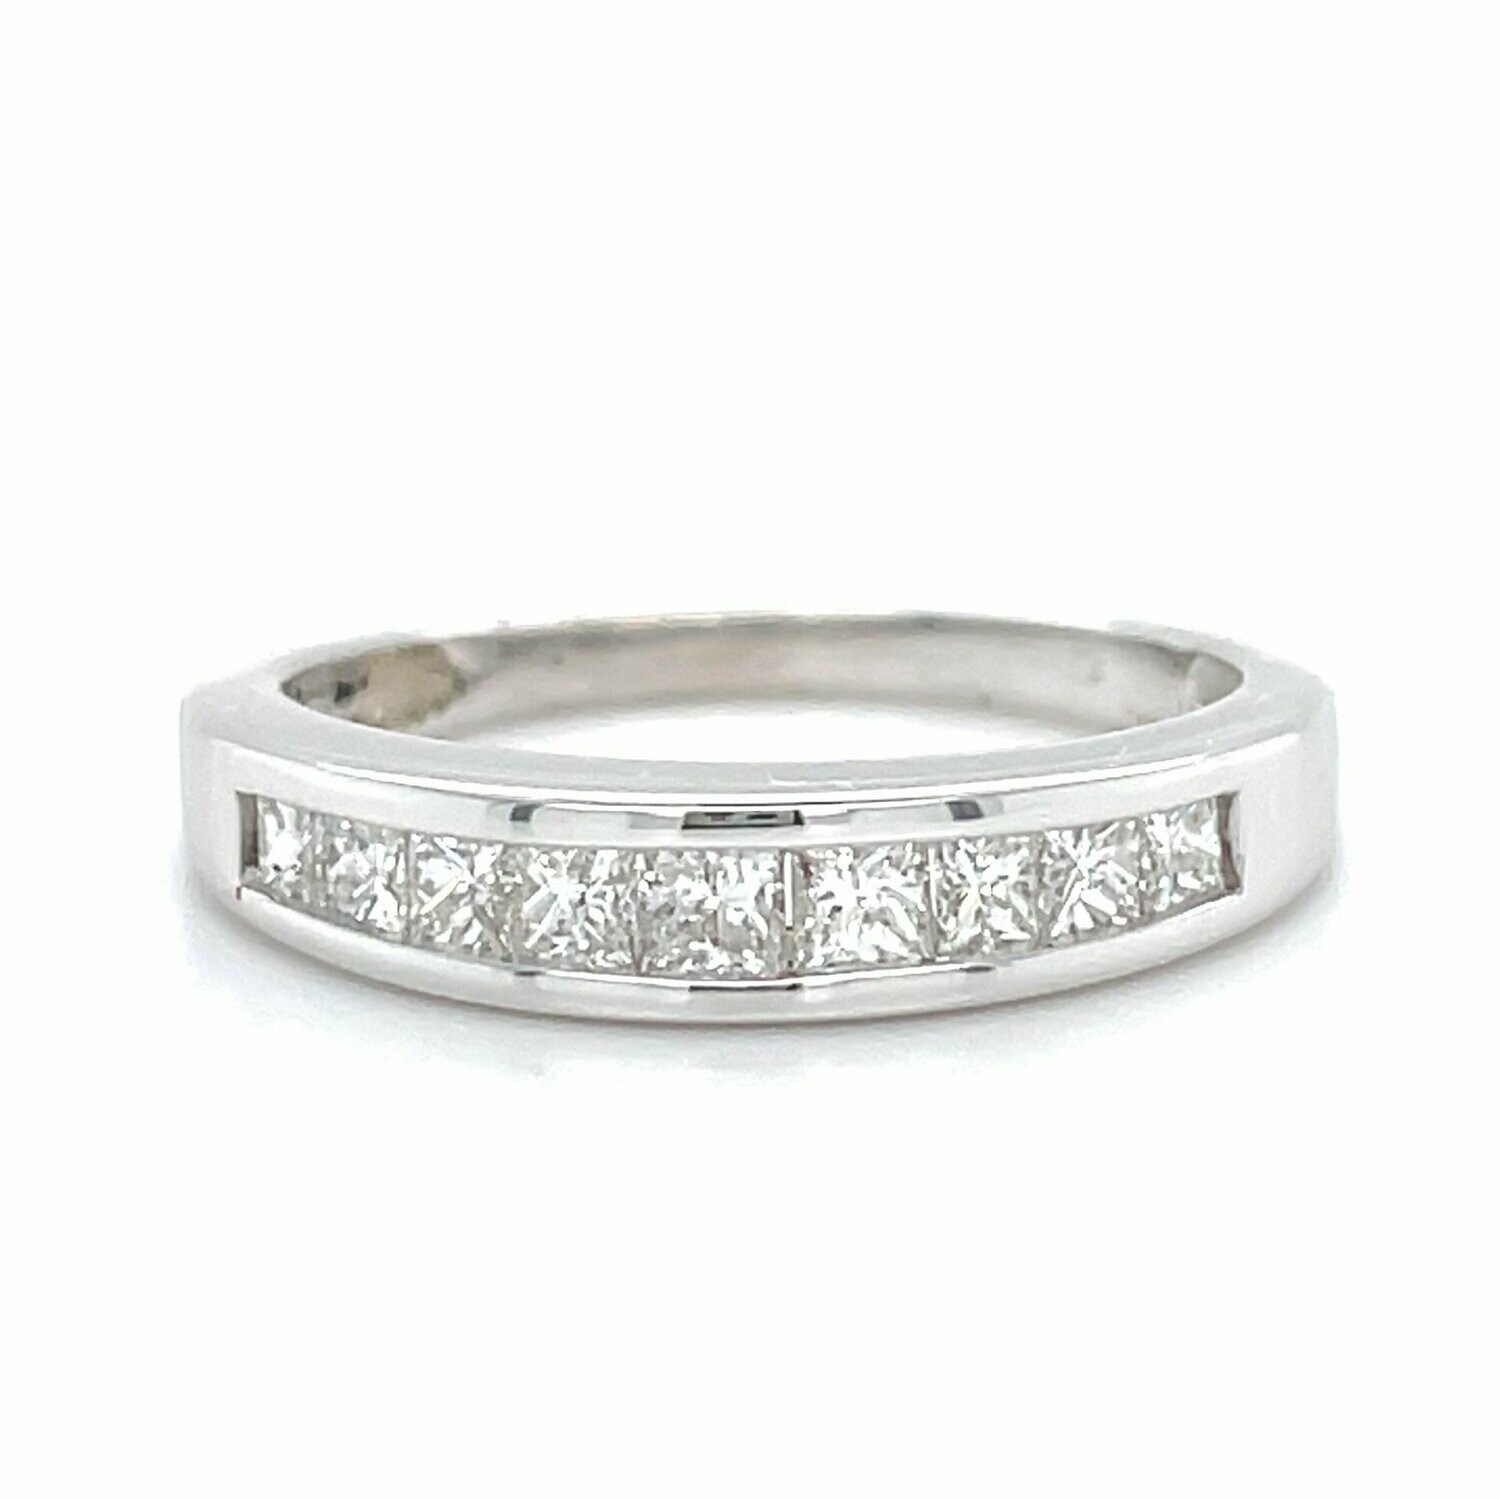 Diamond Princess Cut Channel Set Band in 14k White Gold — 0.50cts